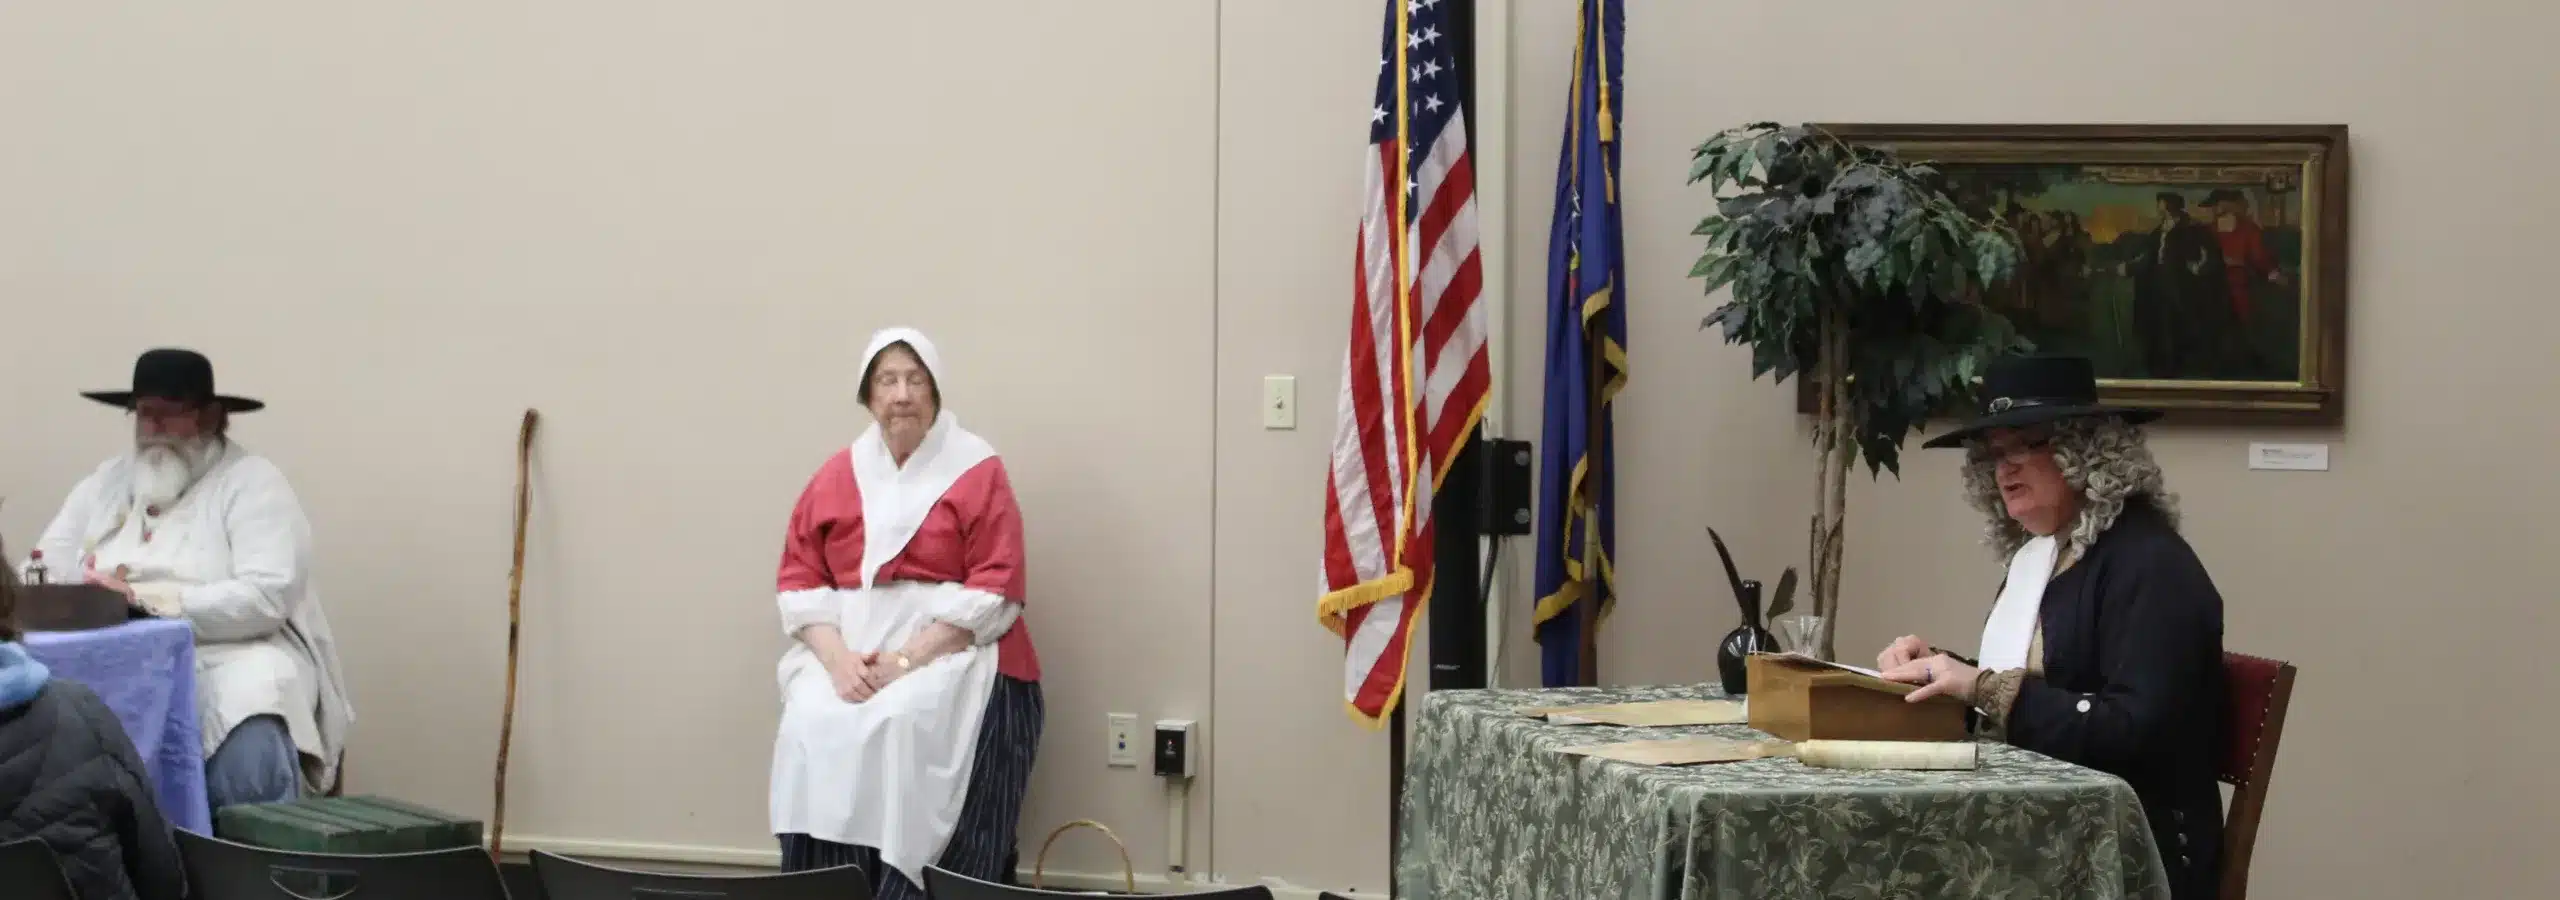 An actor playing William Penn and 2 other colonial actors are participating in a trial